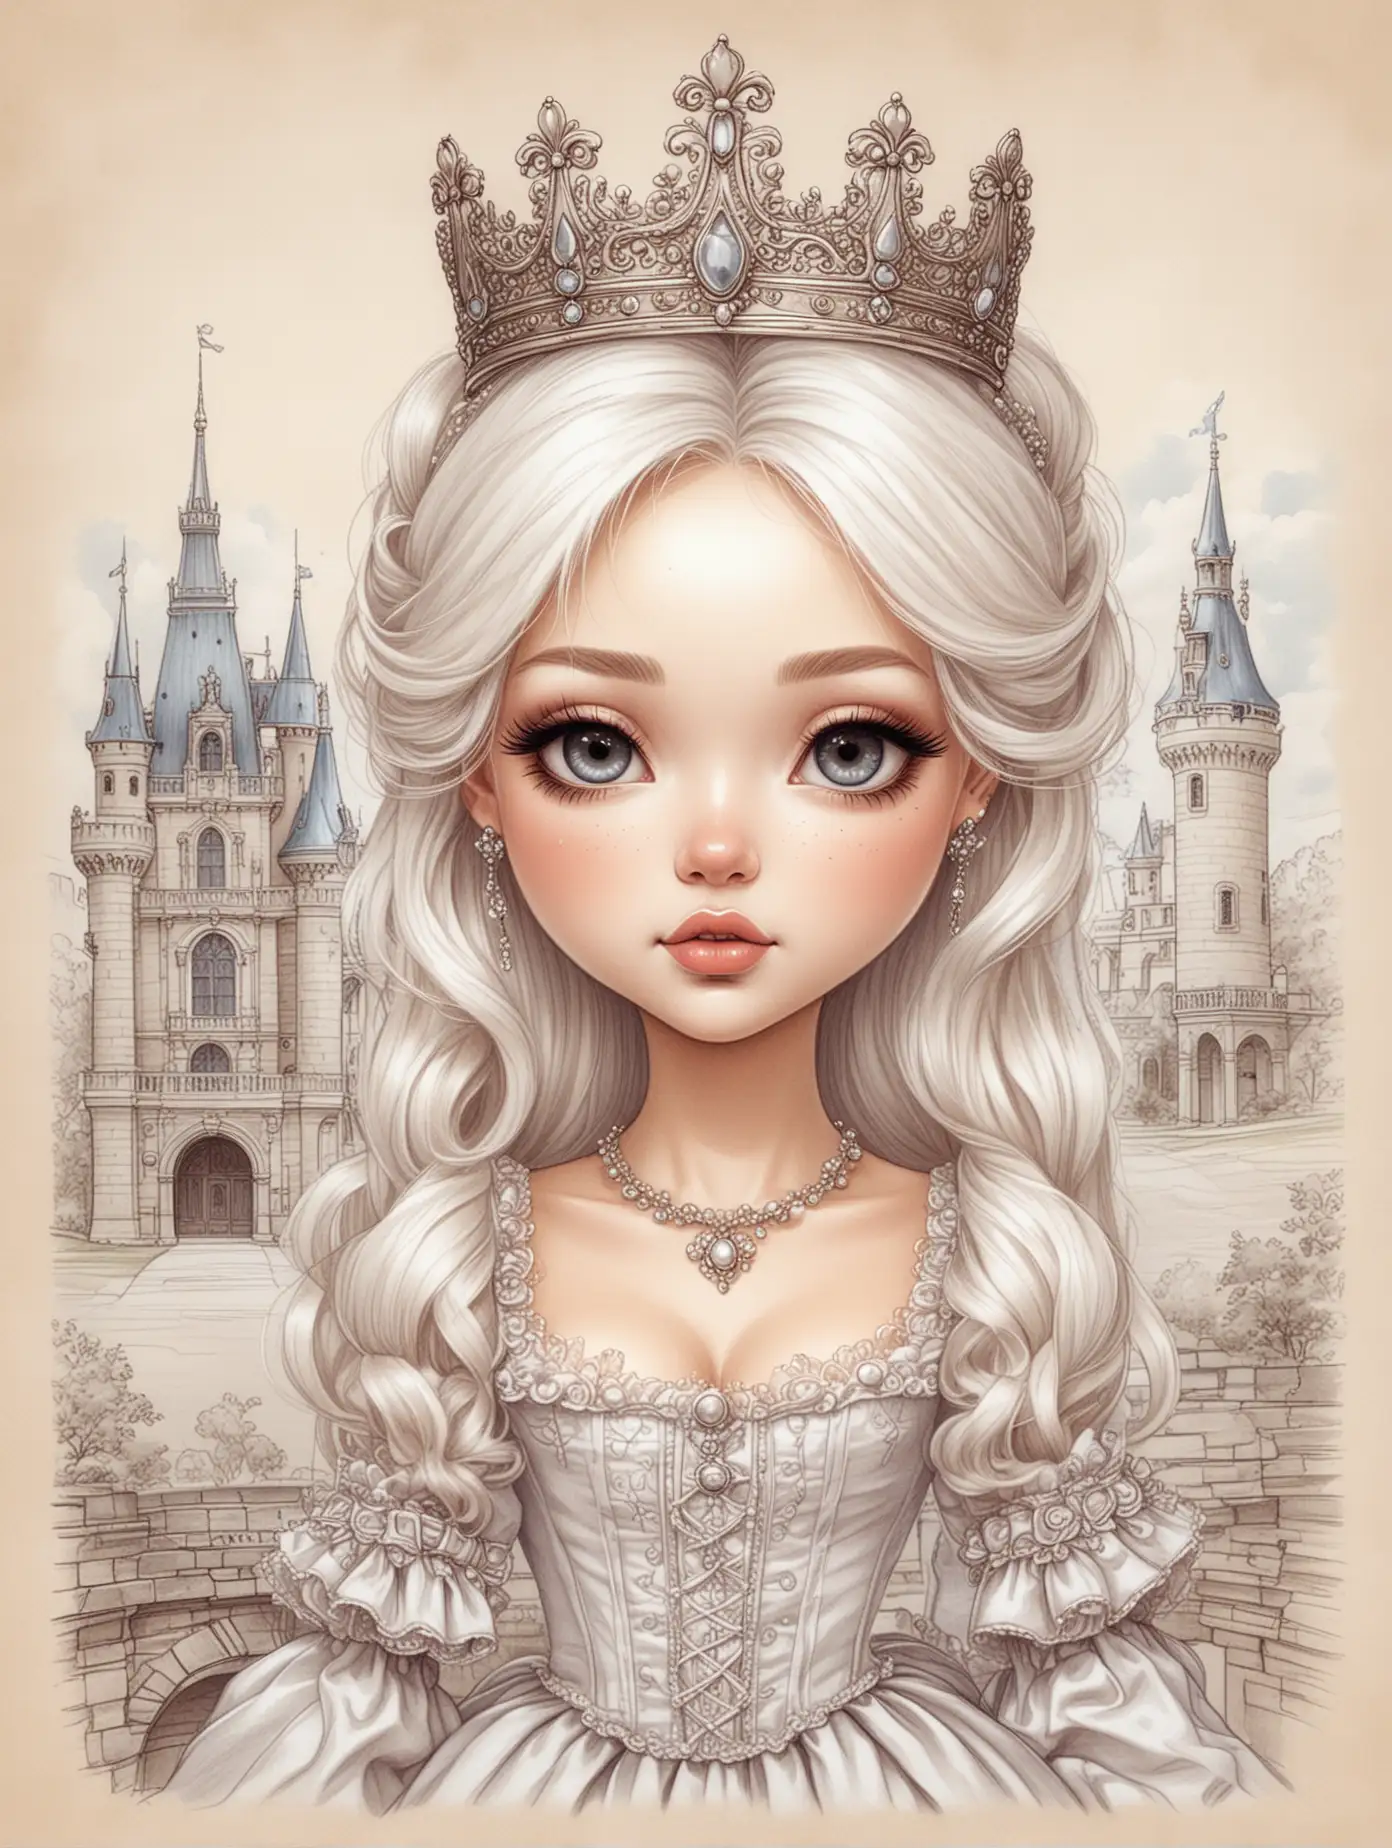 realistic pencil drawn sketch outline of a beautiful woman, chibi style, she has white hair, plump lips, big almond eyes. She is dressed in Marie Antoinette french queen outfit, crown, high heels, with the castle of Versailles behind her 